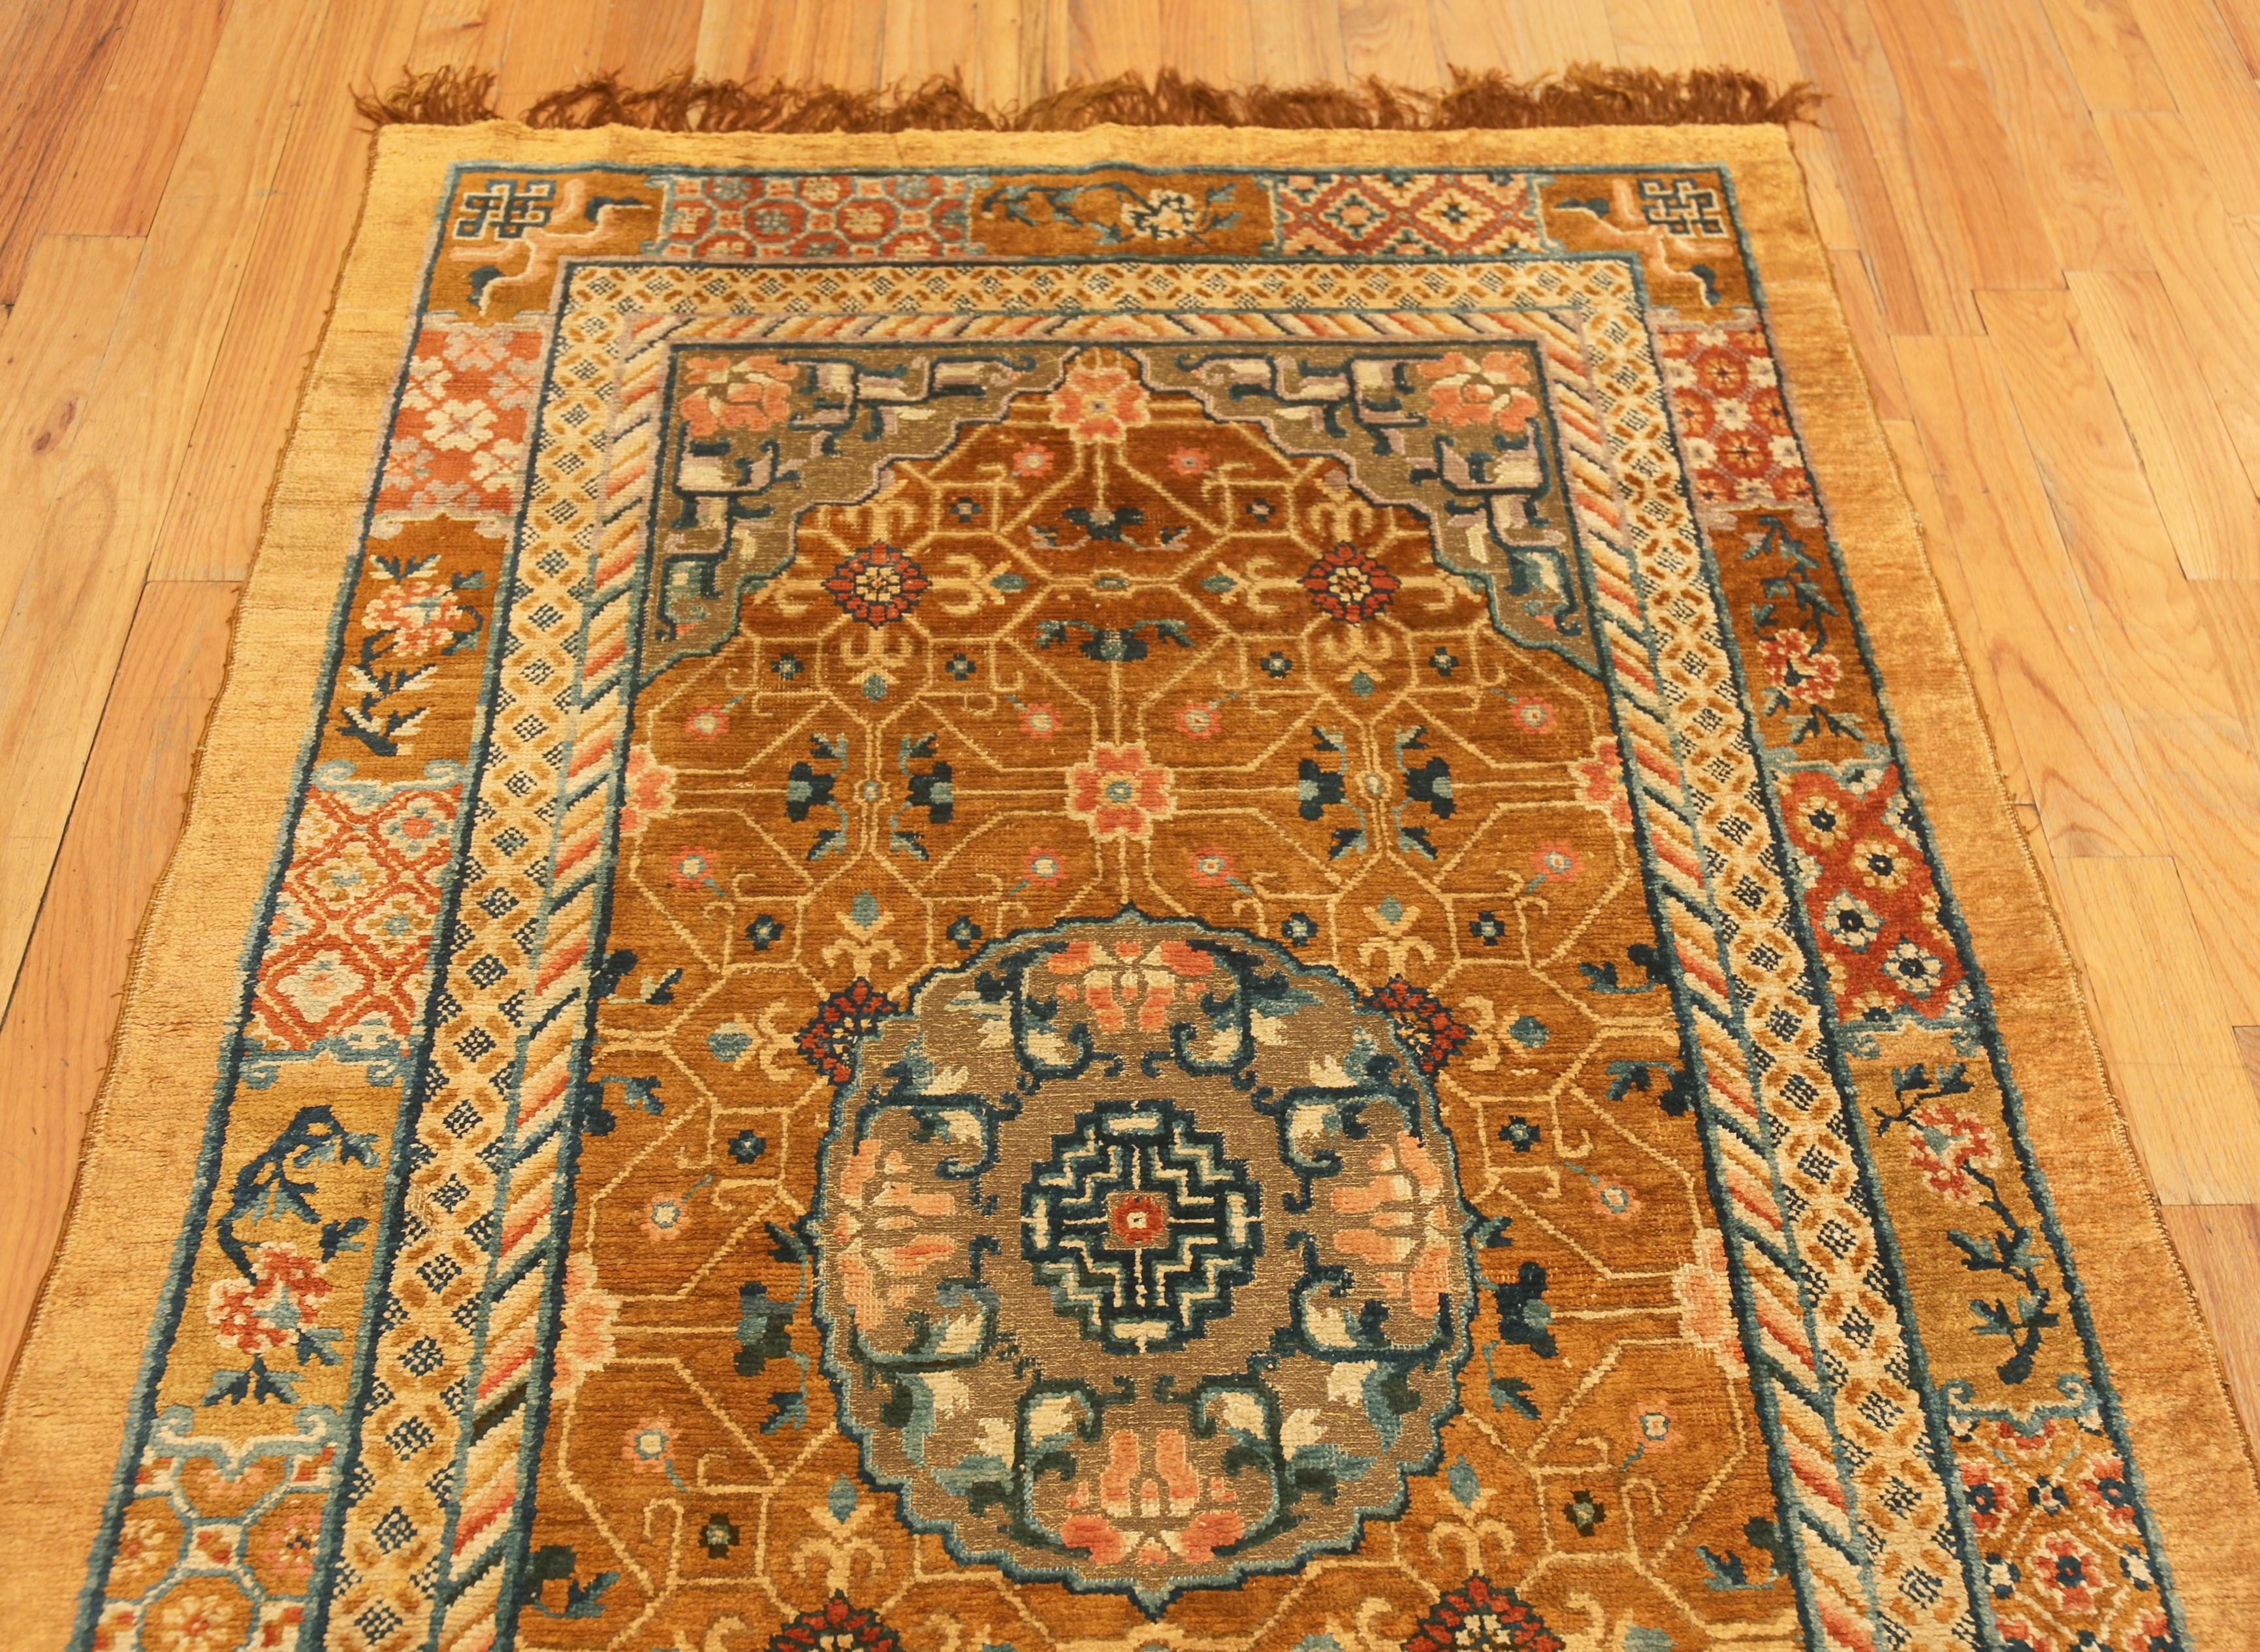 Qing Collectible Antique Mid 19th Century Chinese Metallic and Silk Pile Rug 4' x 7' For Sale